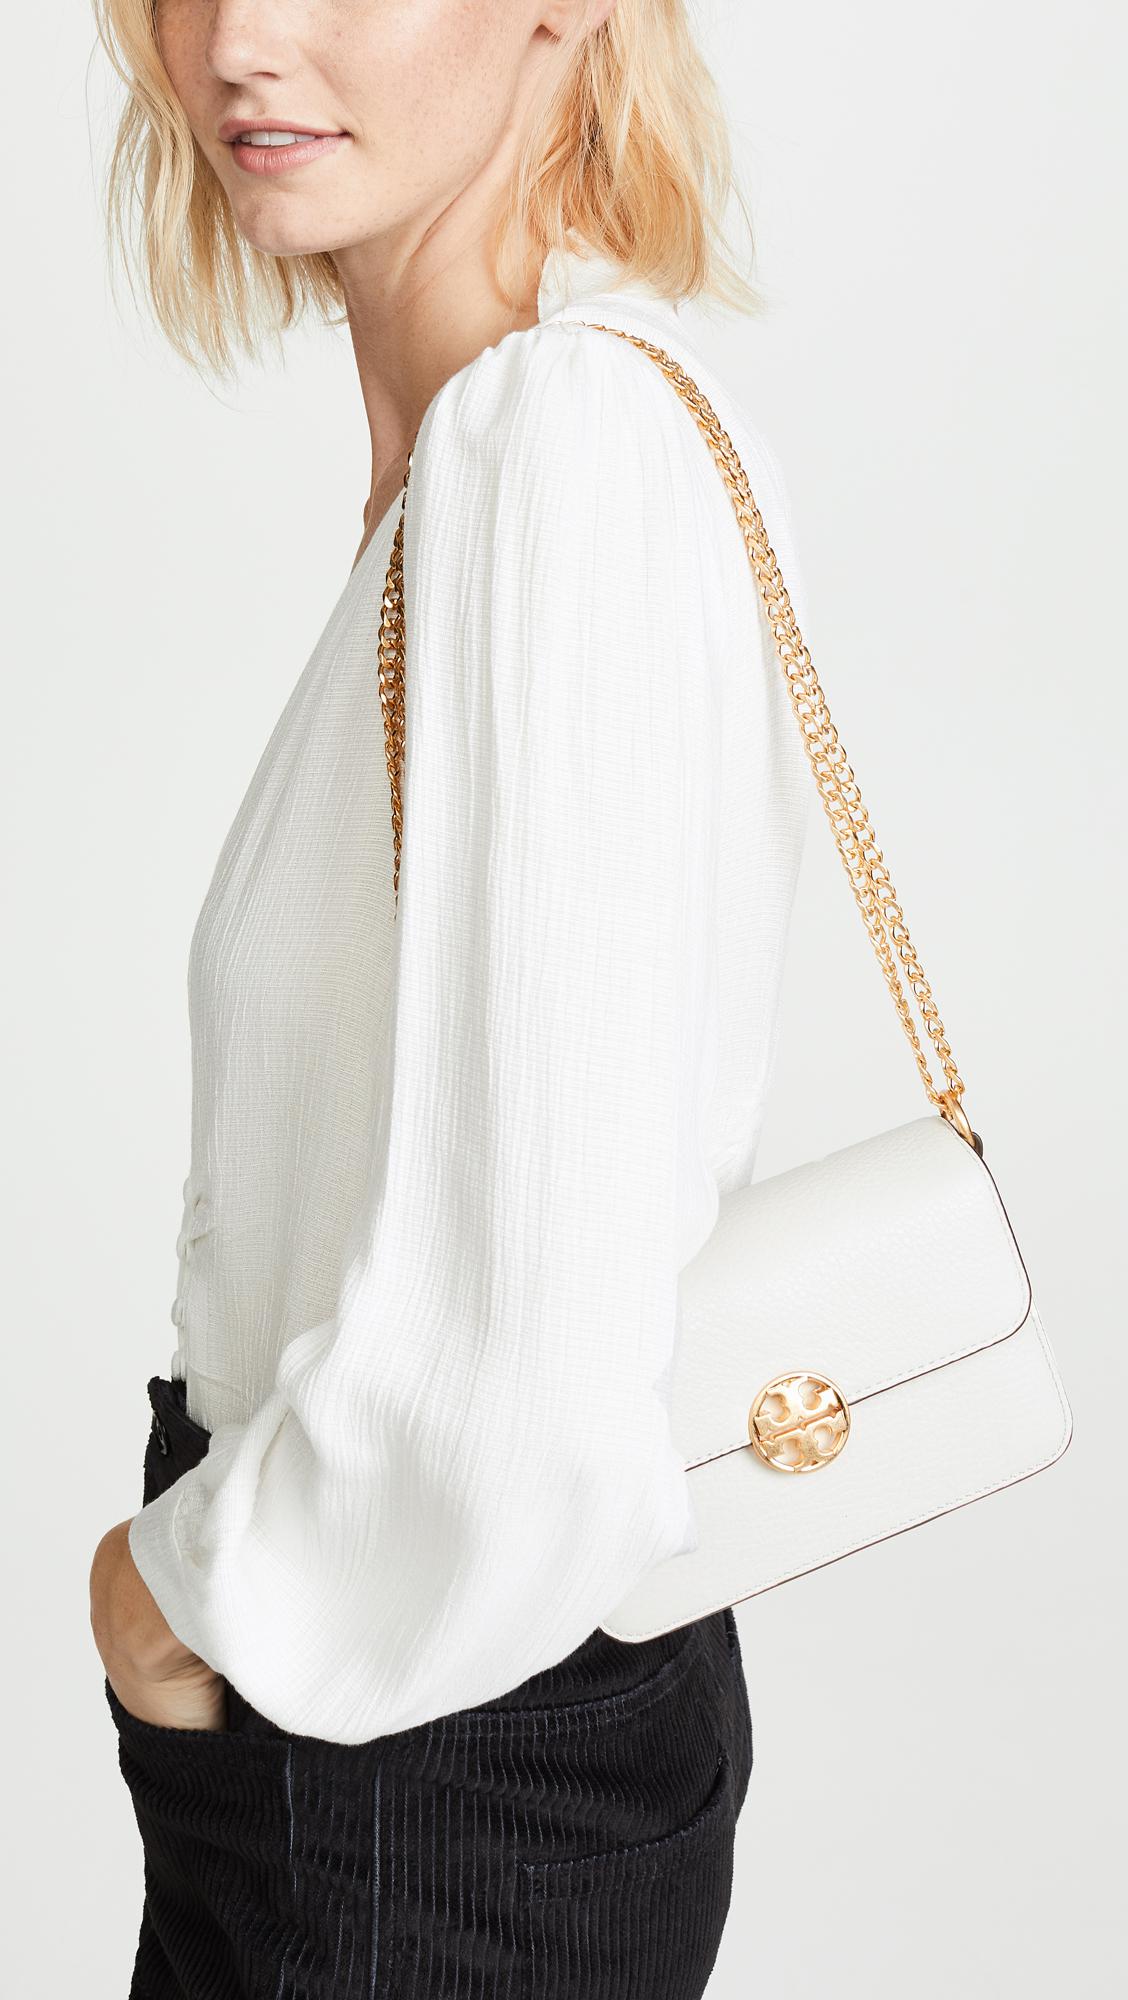 Tory Burch Chelsea Leather Crossbody Bag in White | Lyst